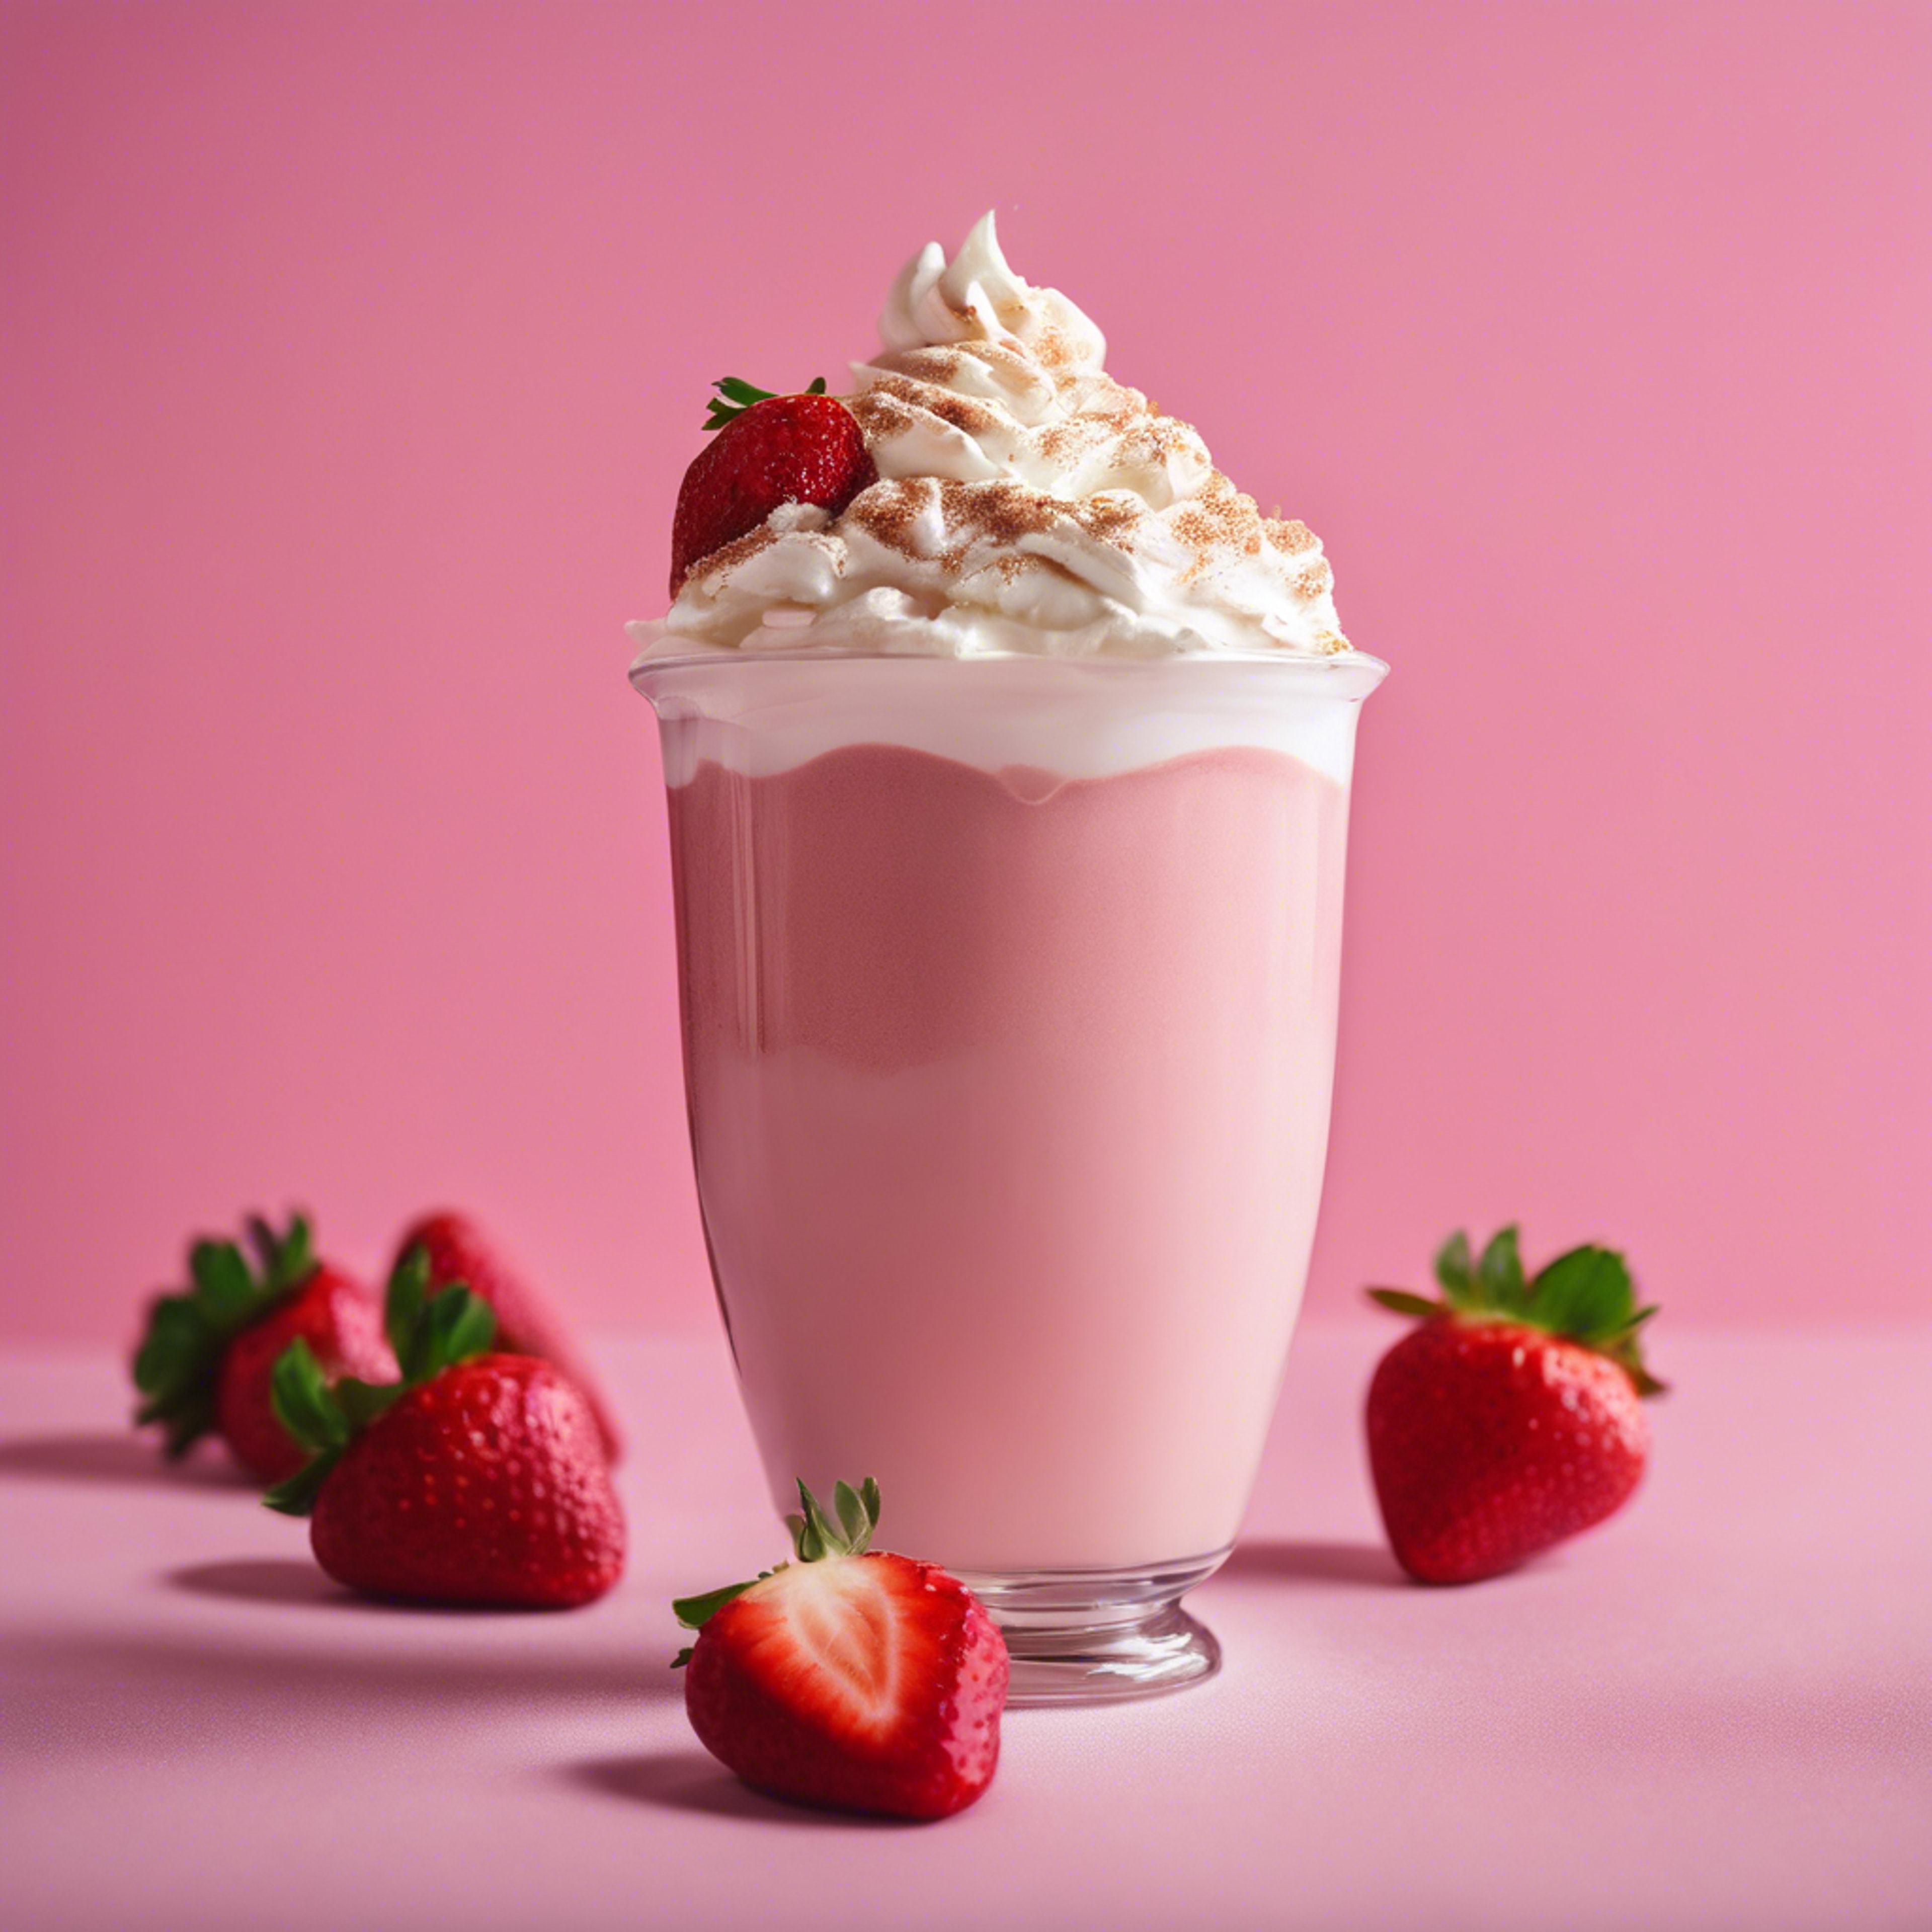 A freshly brewed strawberry latte with whipped cream against a pink backdrop. Tapeta[f1420ed34c924526b0ea]